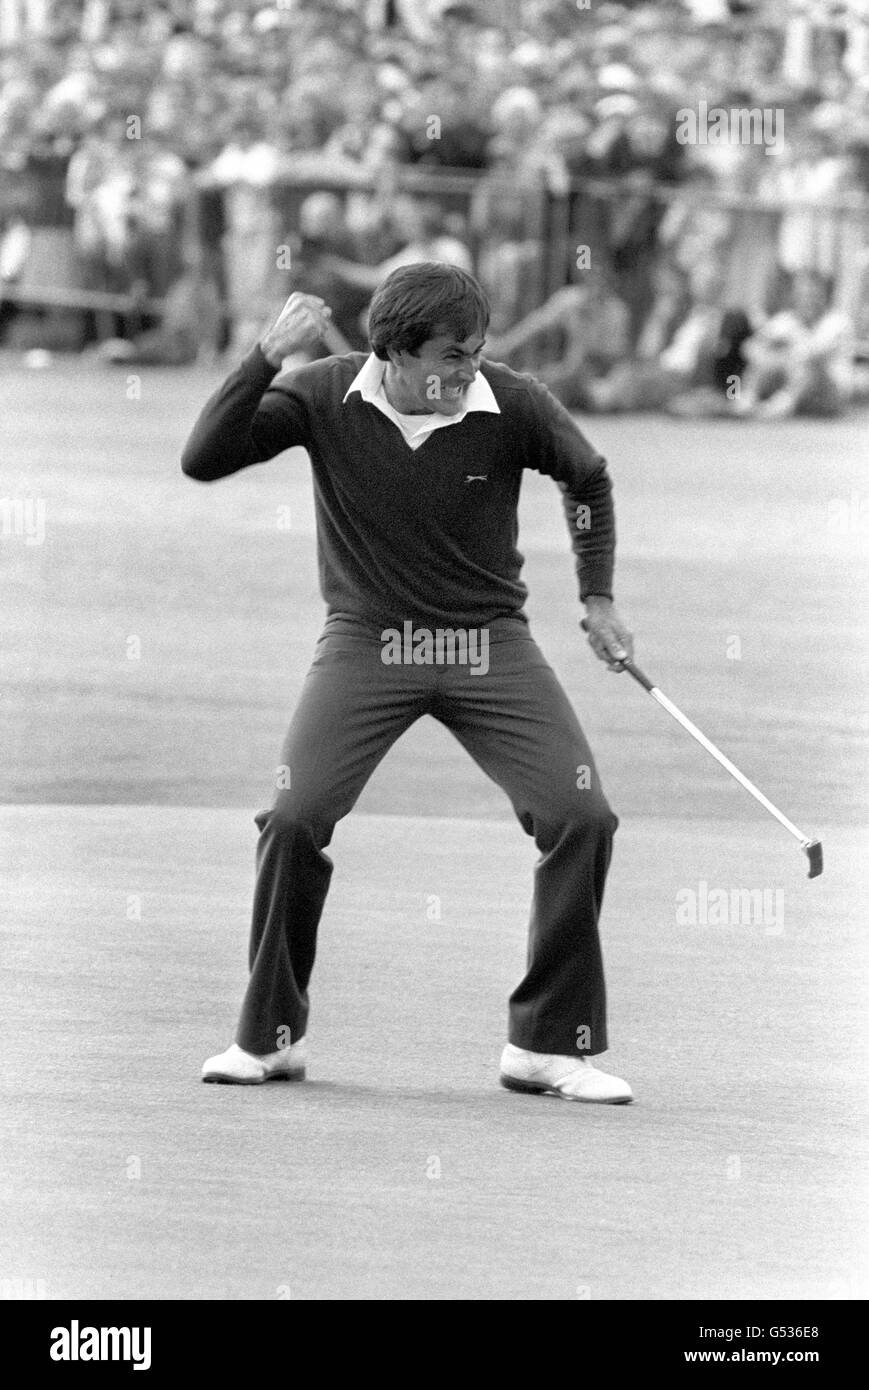 Spain's Seve Ballesteros, clinches the Open Gold Championship at St Andrew's, Fife, with a birdie putt on the 18th green. He finished on 276, 12 under par. Stock Photo